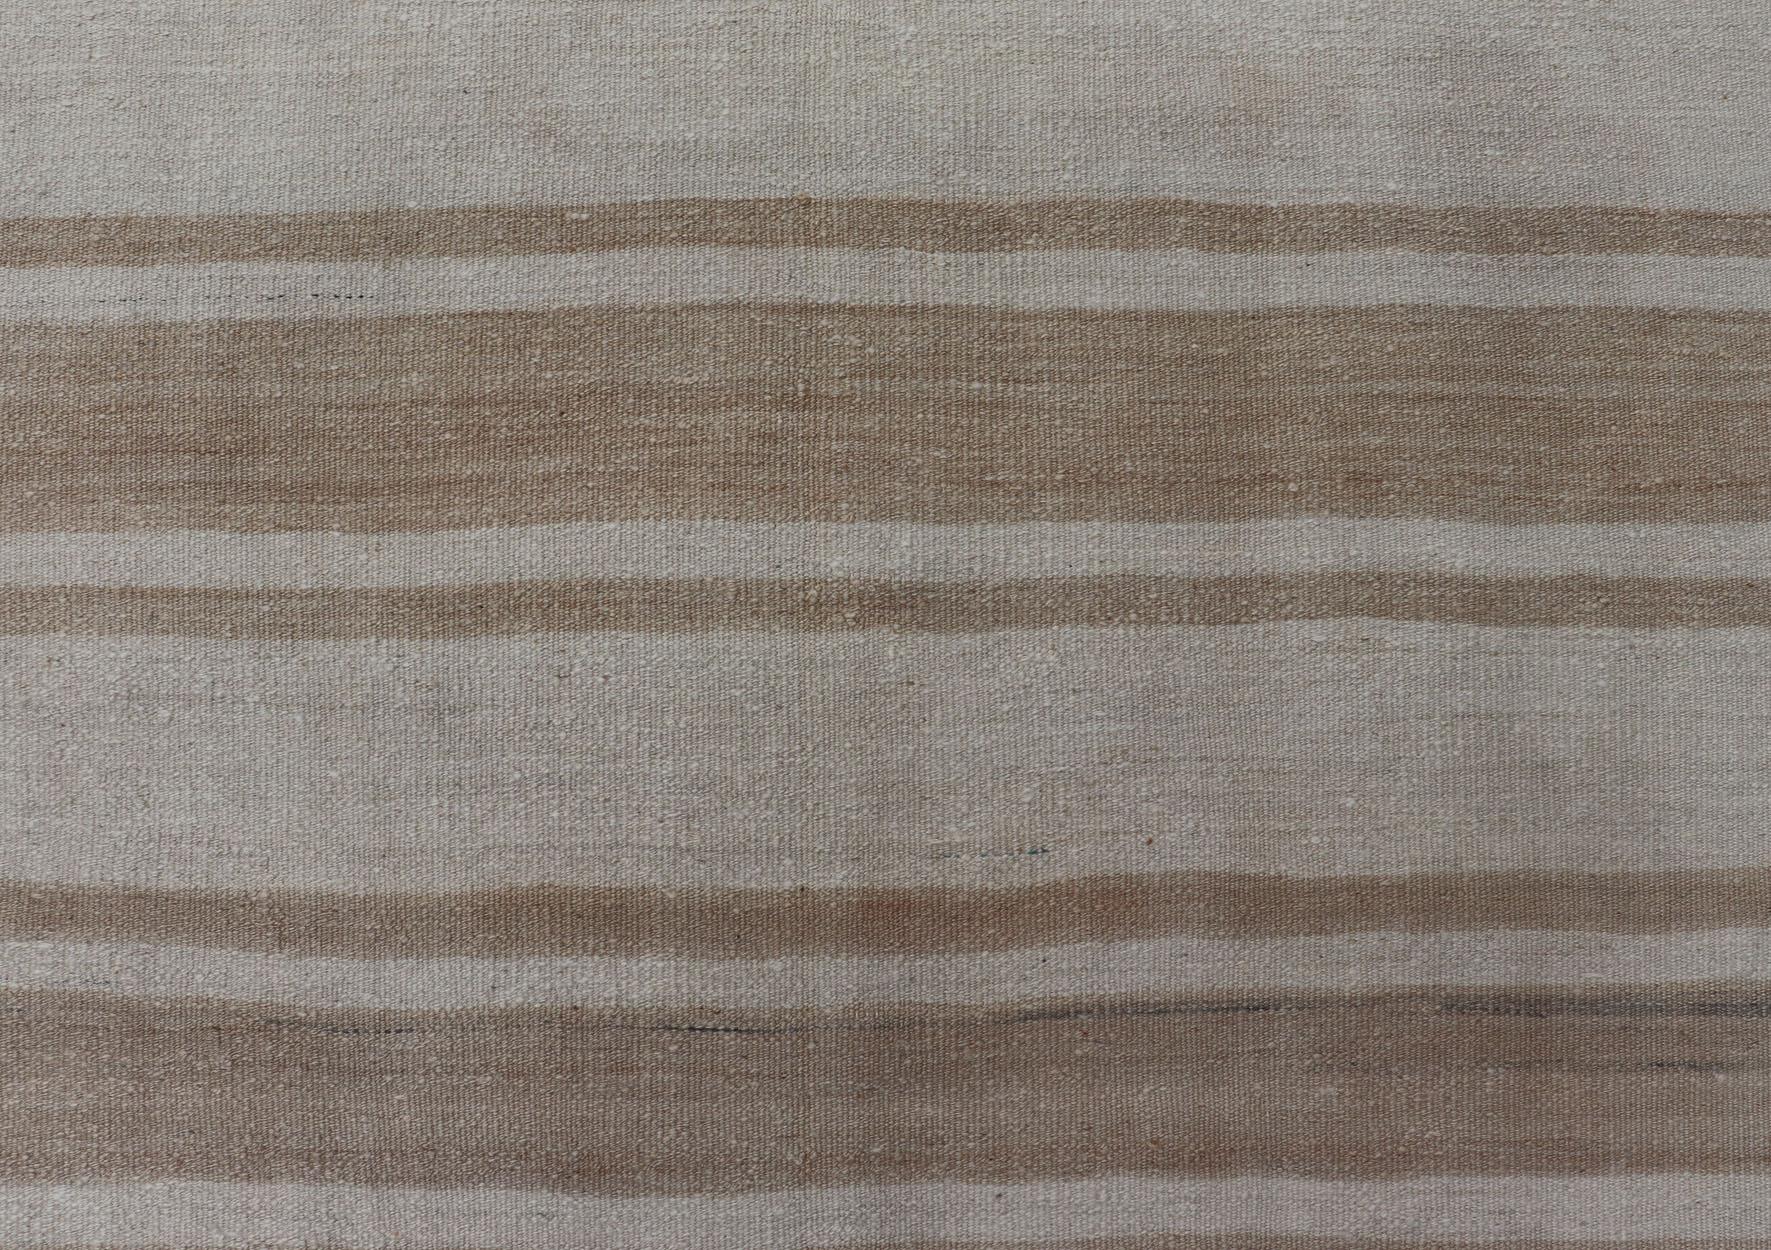 Flat-Weave Kilim vintage rug from Turkey with horizontal brown and taupe stripes on a cream background. Keivan Woven Arts /  rug EN-179787, country of origin / type: Turkey / Kilim, circa 1950
Measures:6'2 x 6'6 
This vintage flat-woven Kilim